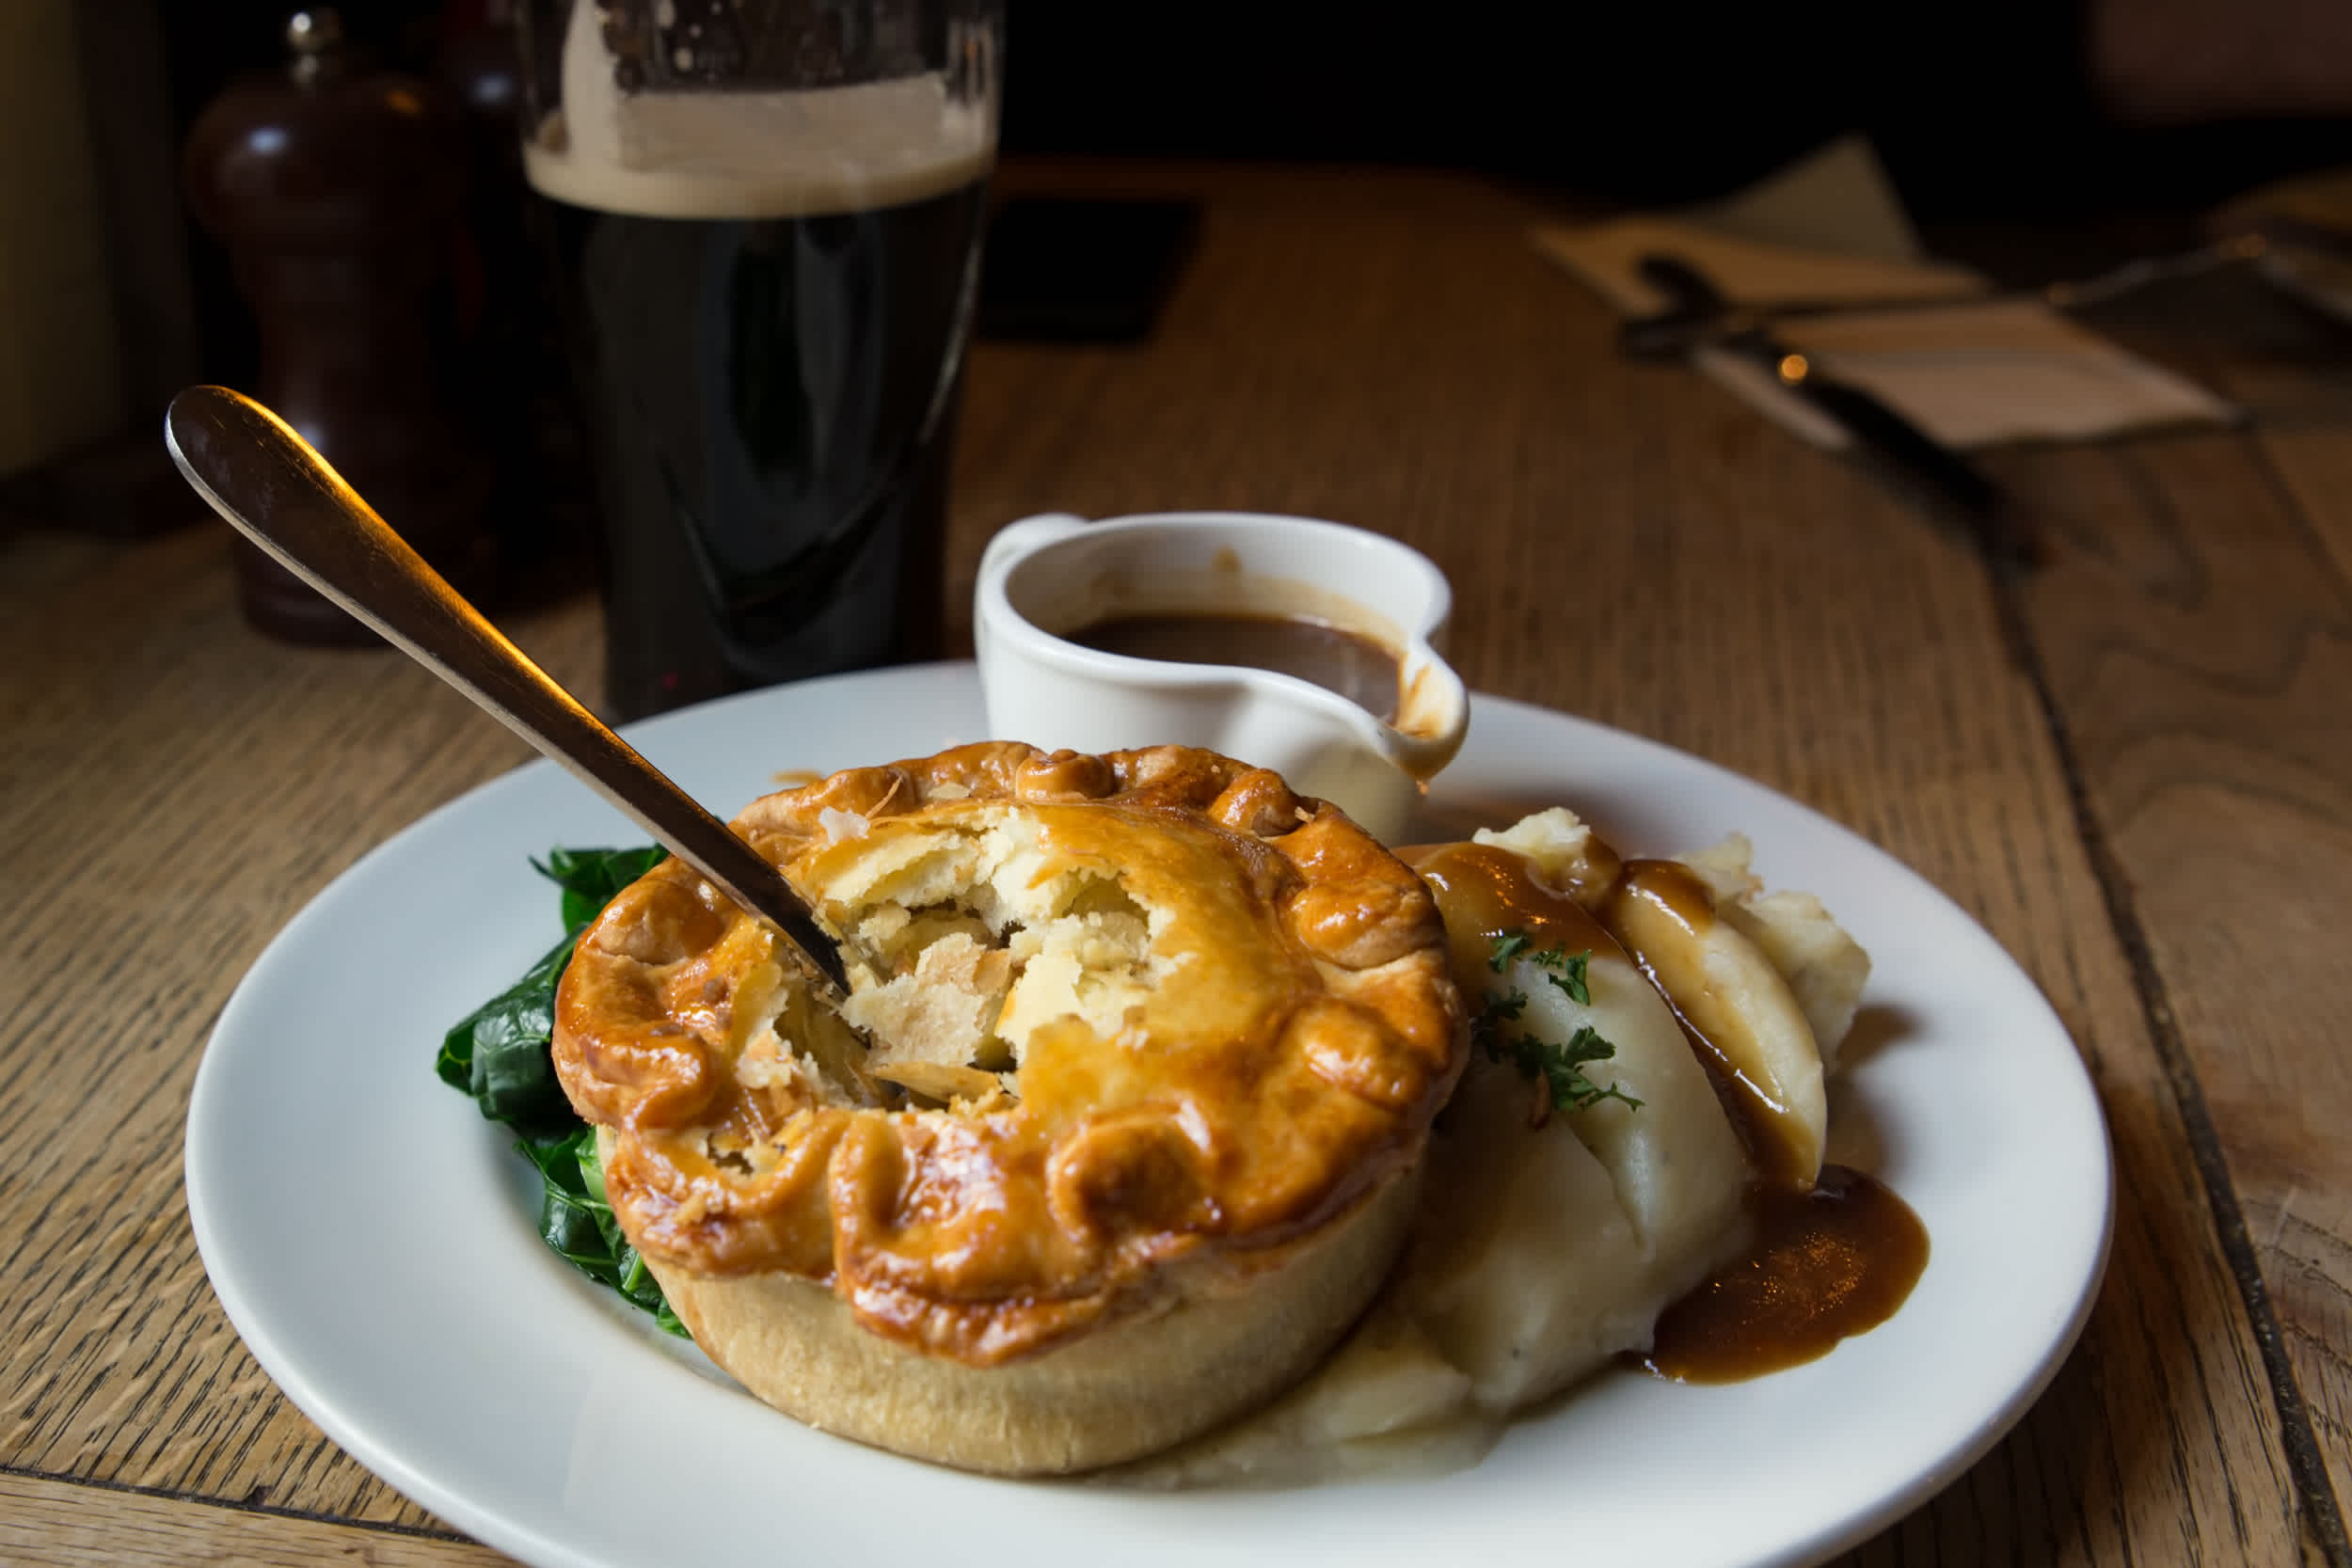 Traditional English chicken pie with gravy sauce. 

